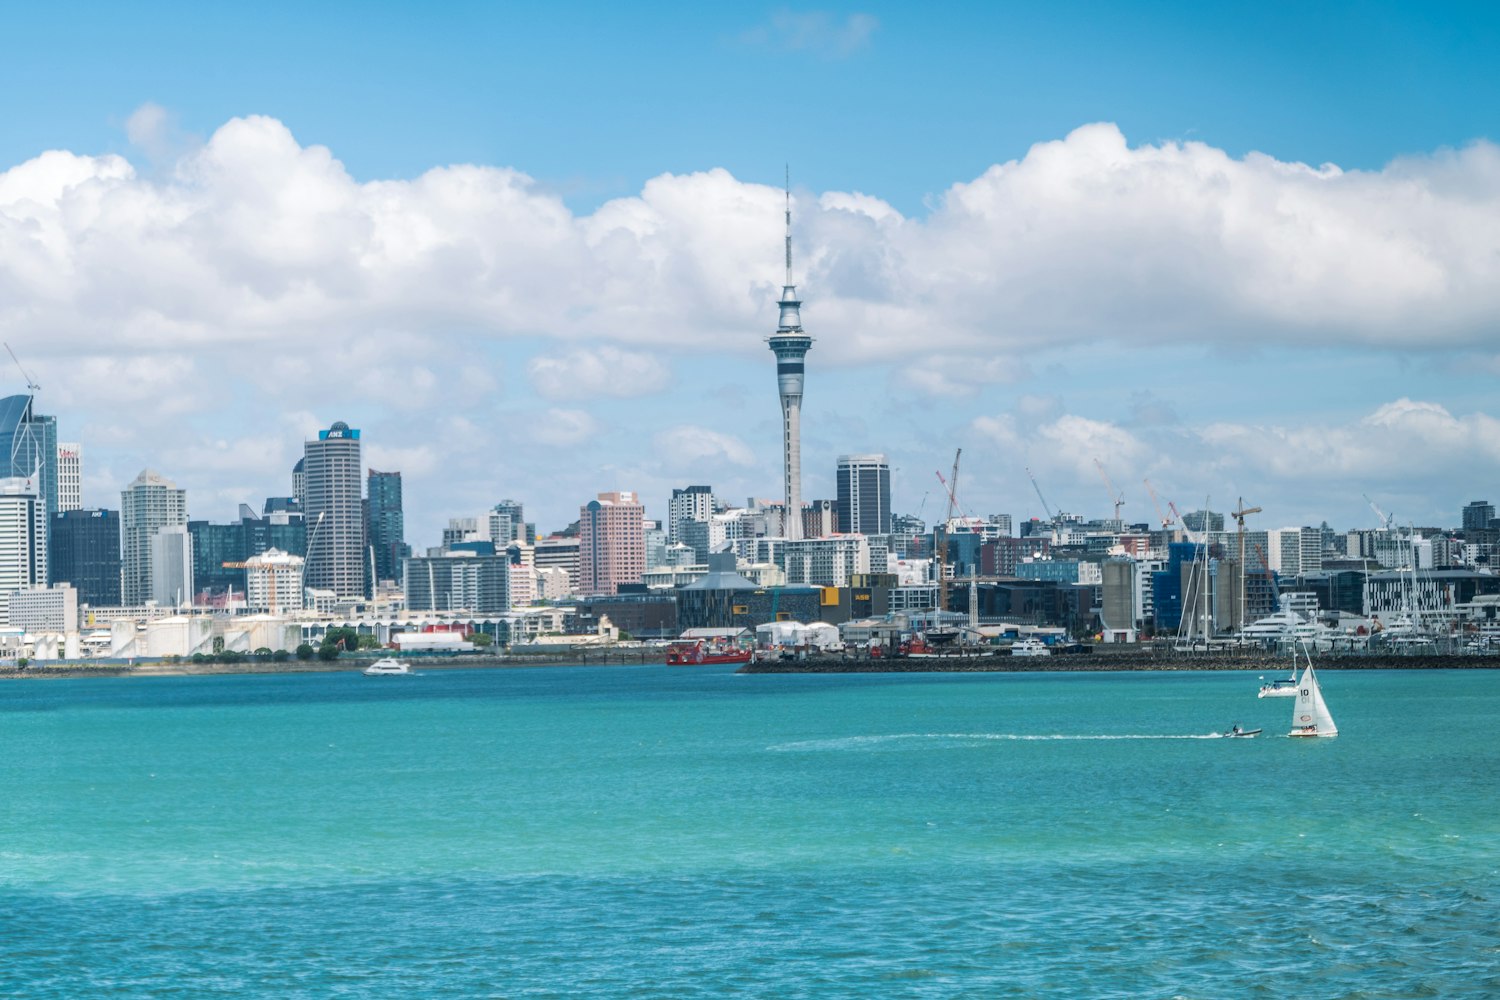 Auckland | The Property Group NZ